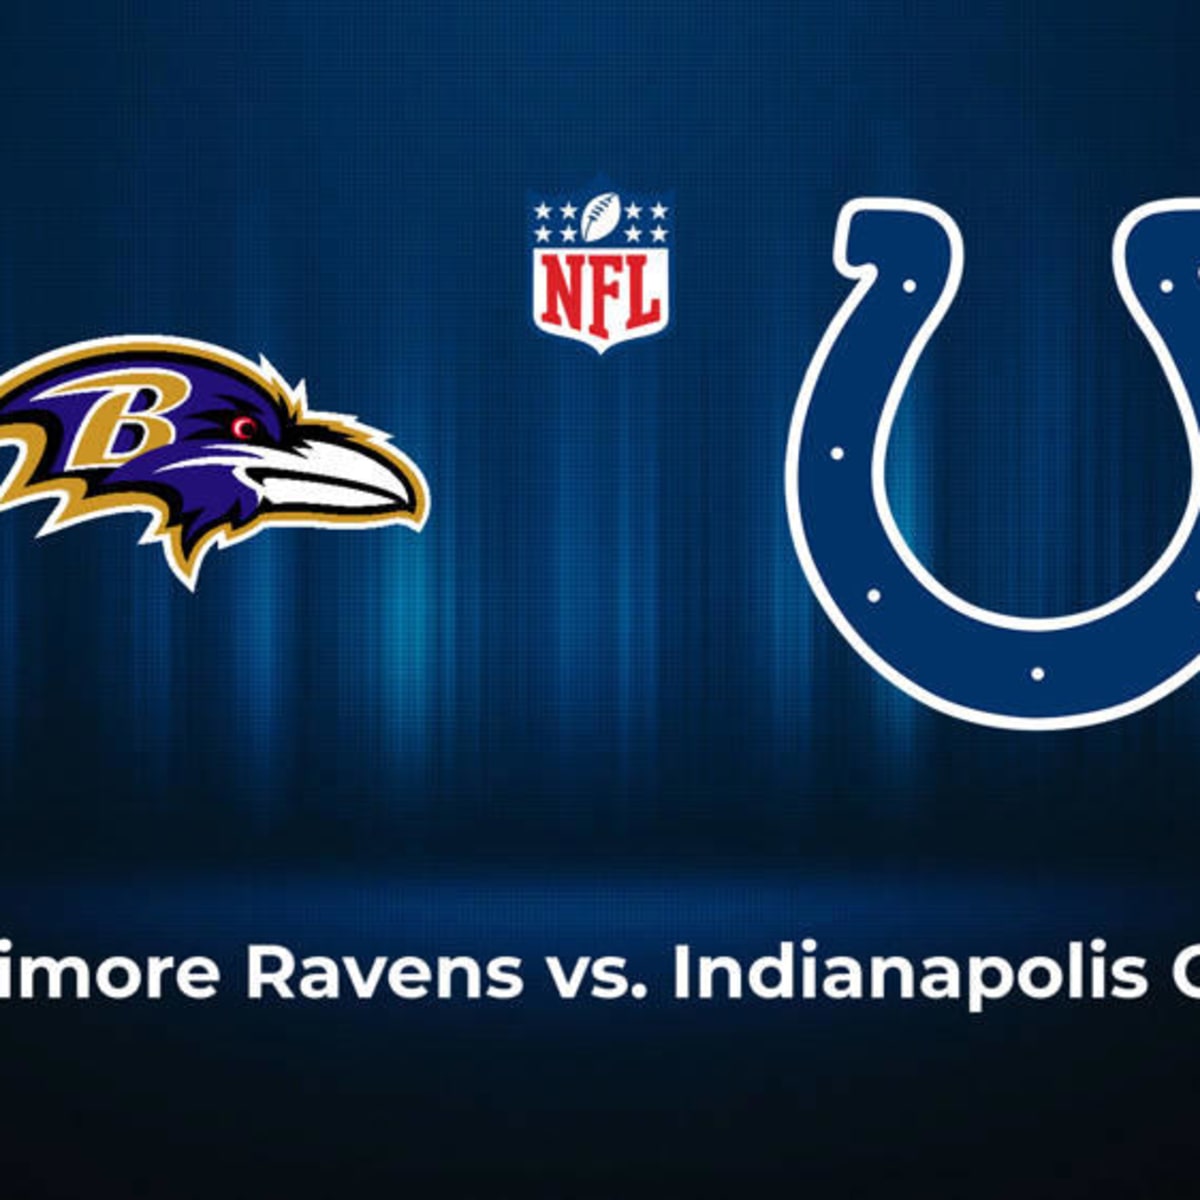 Ravens vs. Colts: 7 stats to know for Week 3 matchup